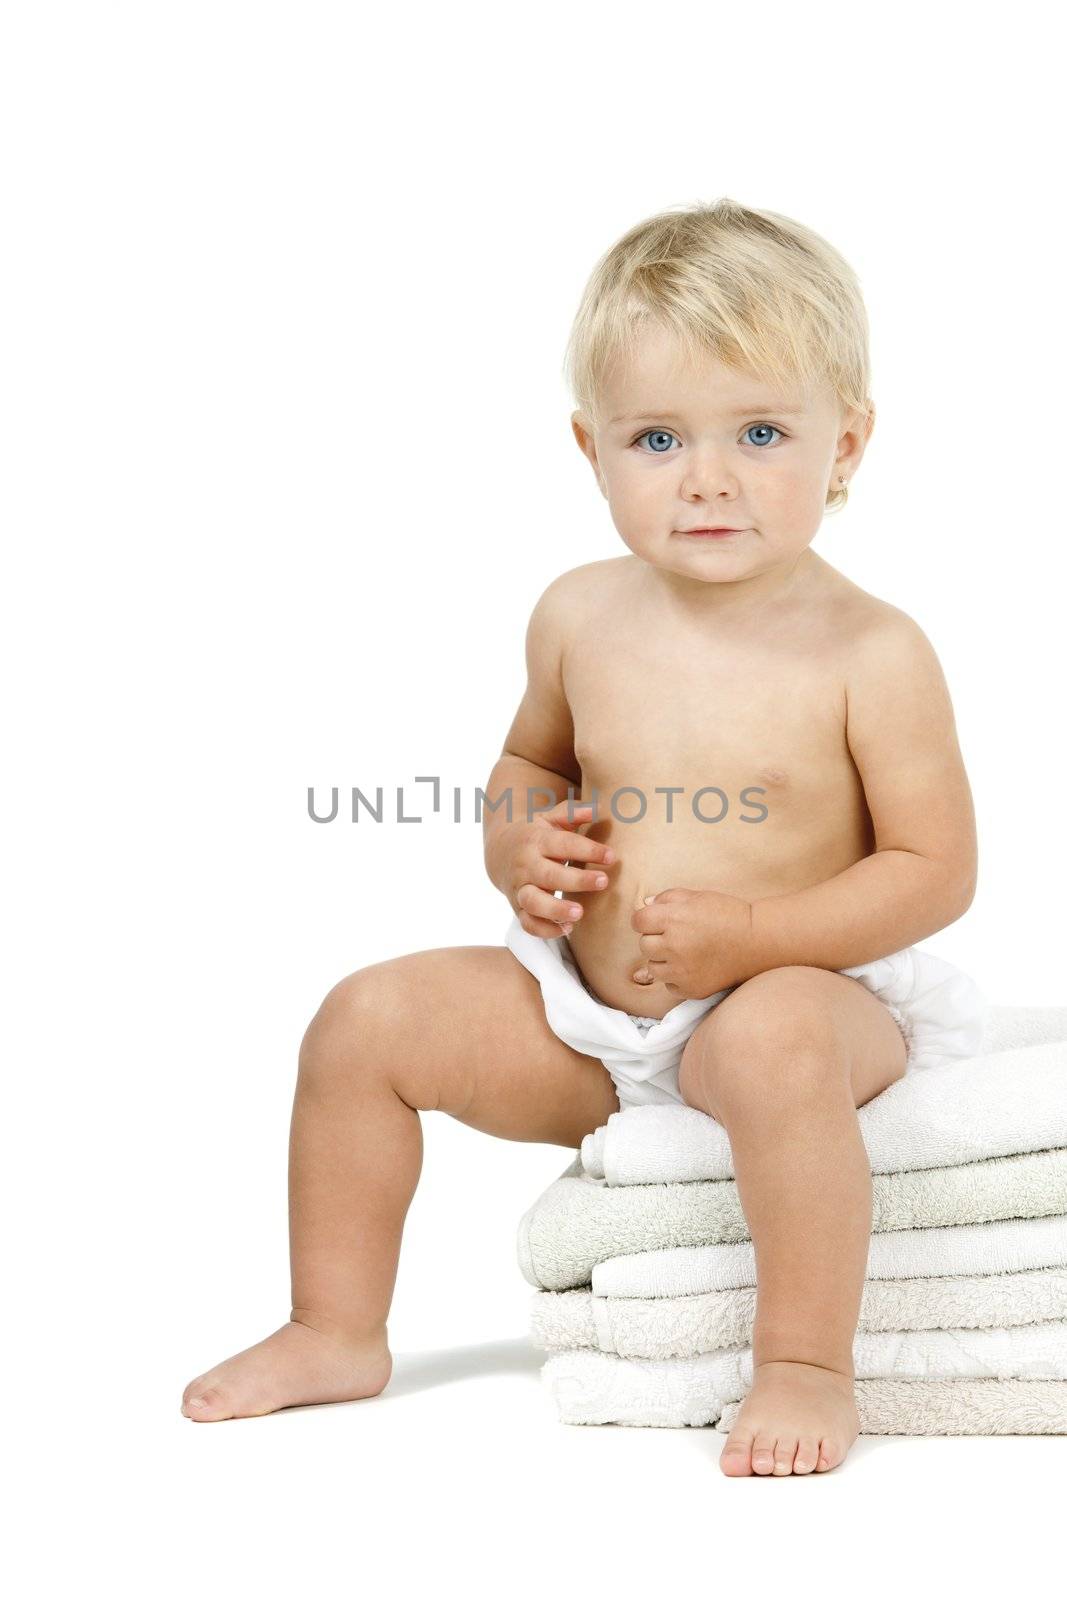 Blue eyed baby girl  sitting on a pile of towels. Isolated on white background.